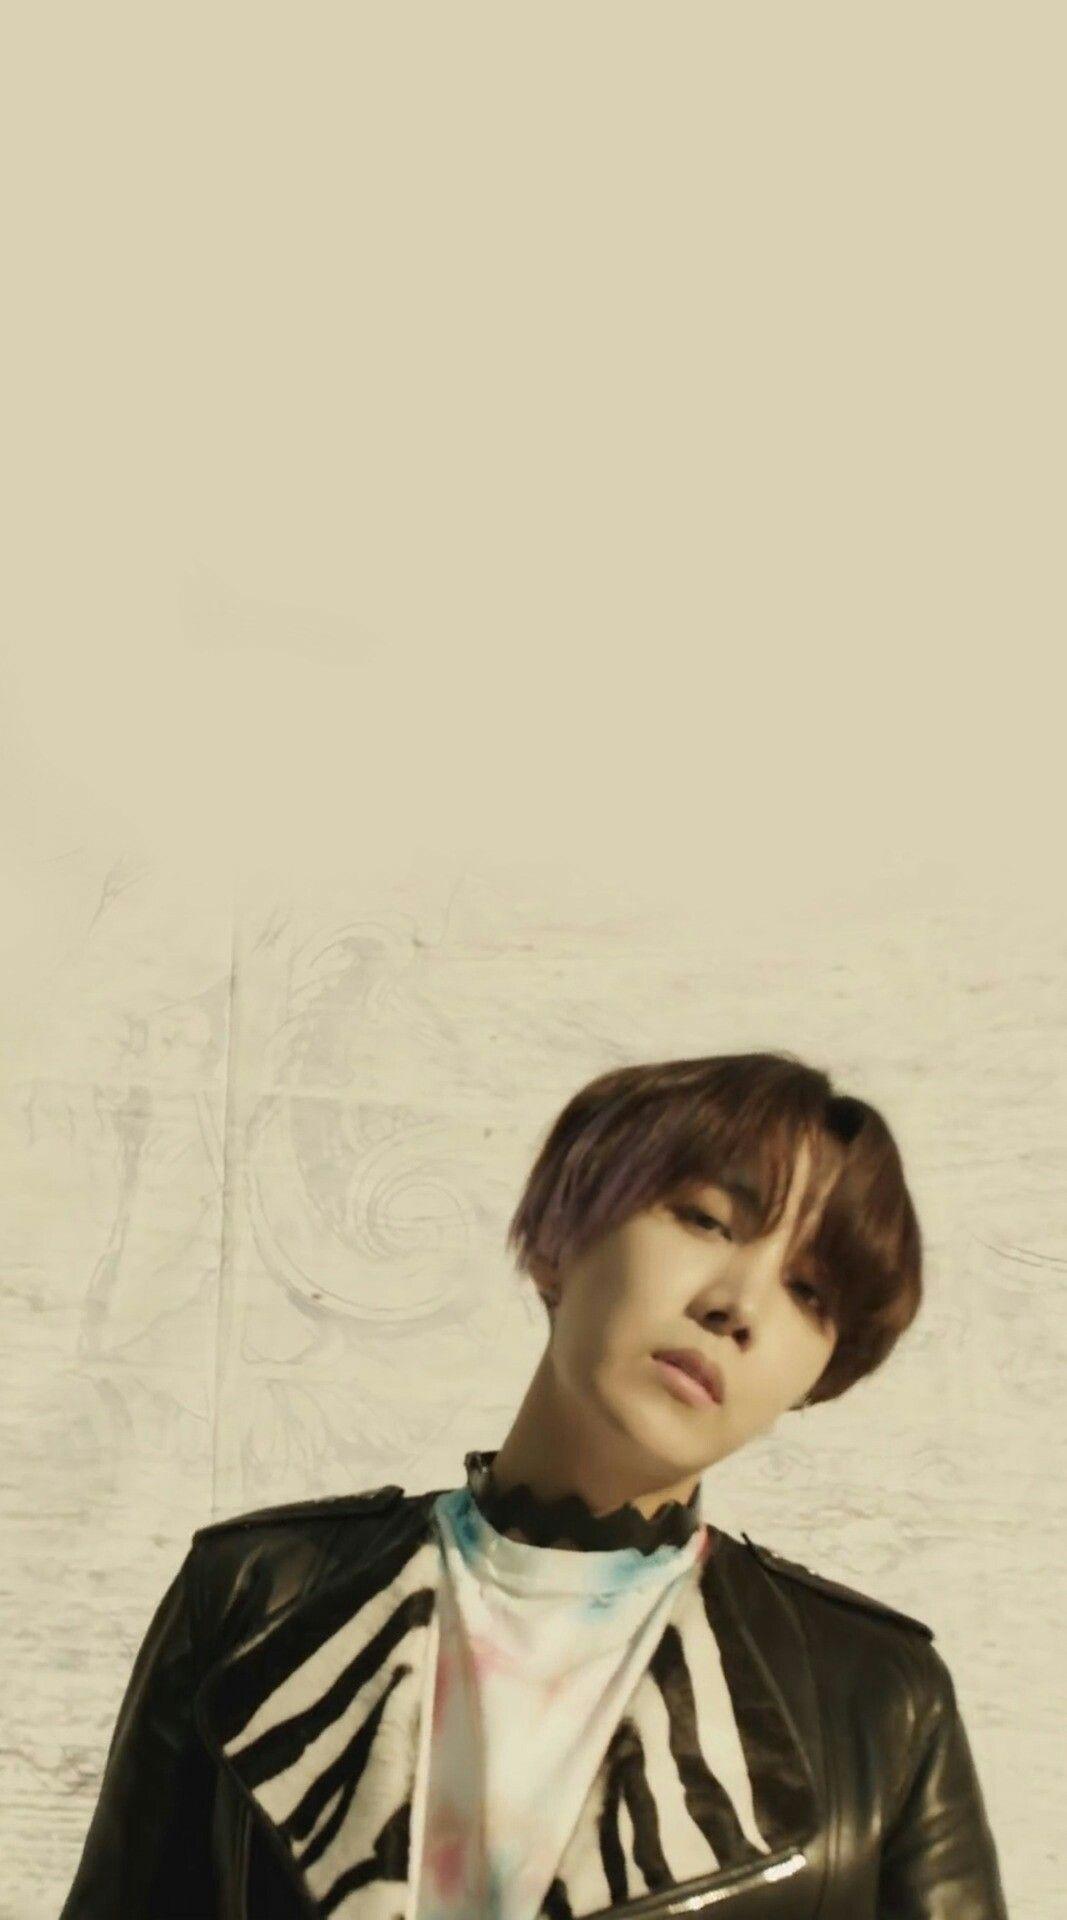 Bts J Hope Wallpapers Top Free Bts J Hope Backgrounds Wallpaperaccess